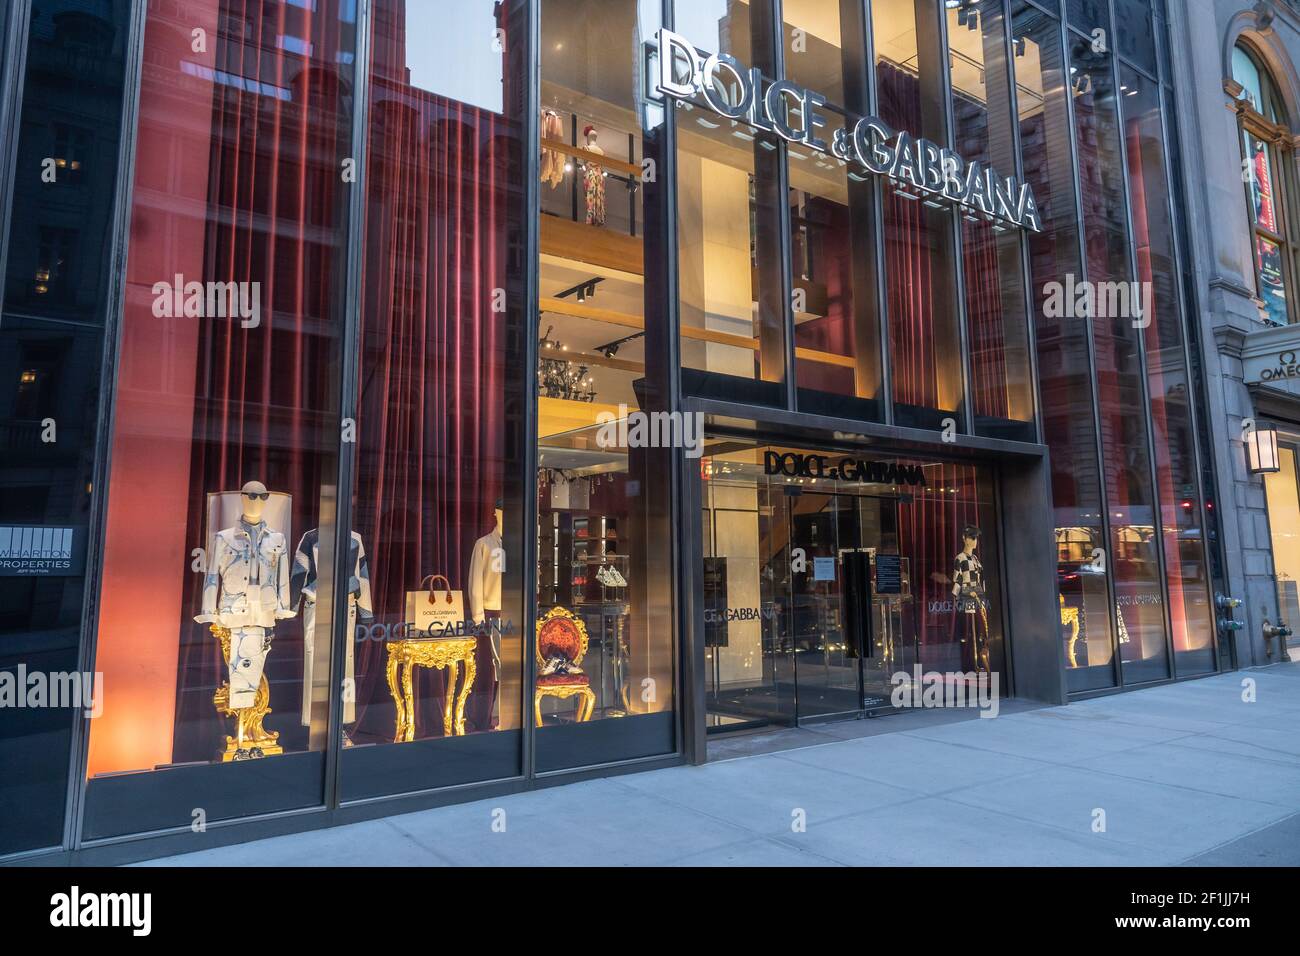 Live: Shopping on 5th Avenue, New York 